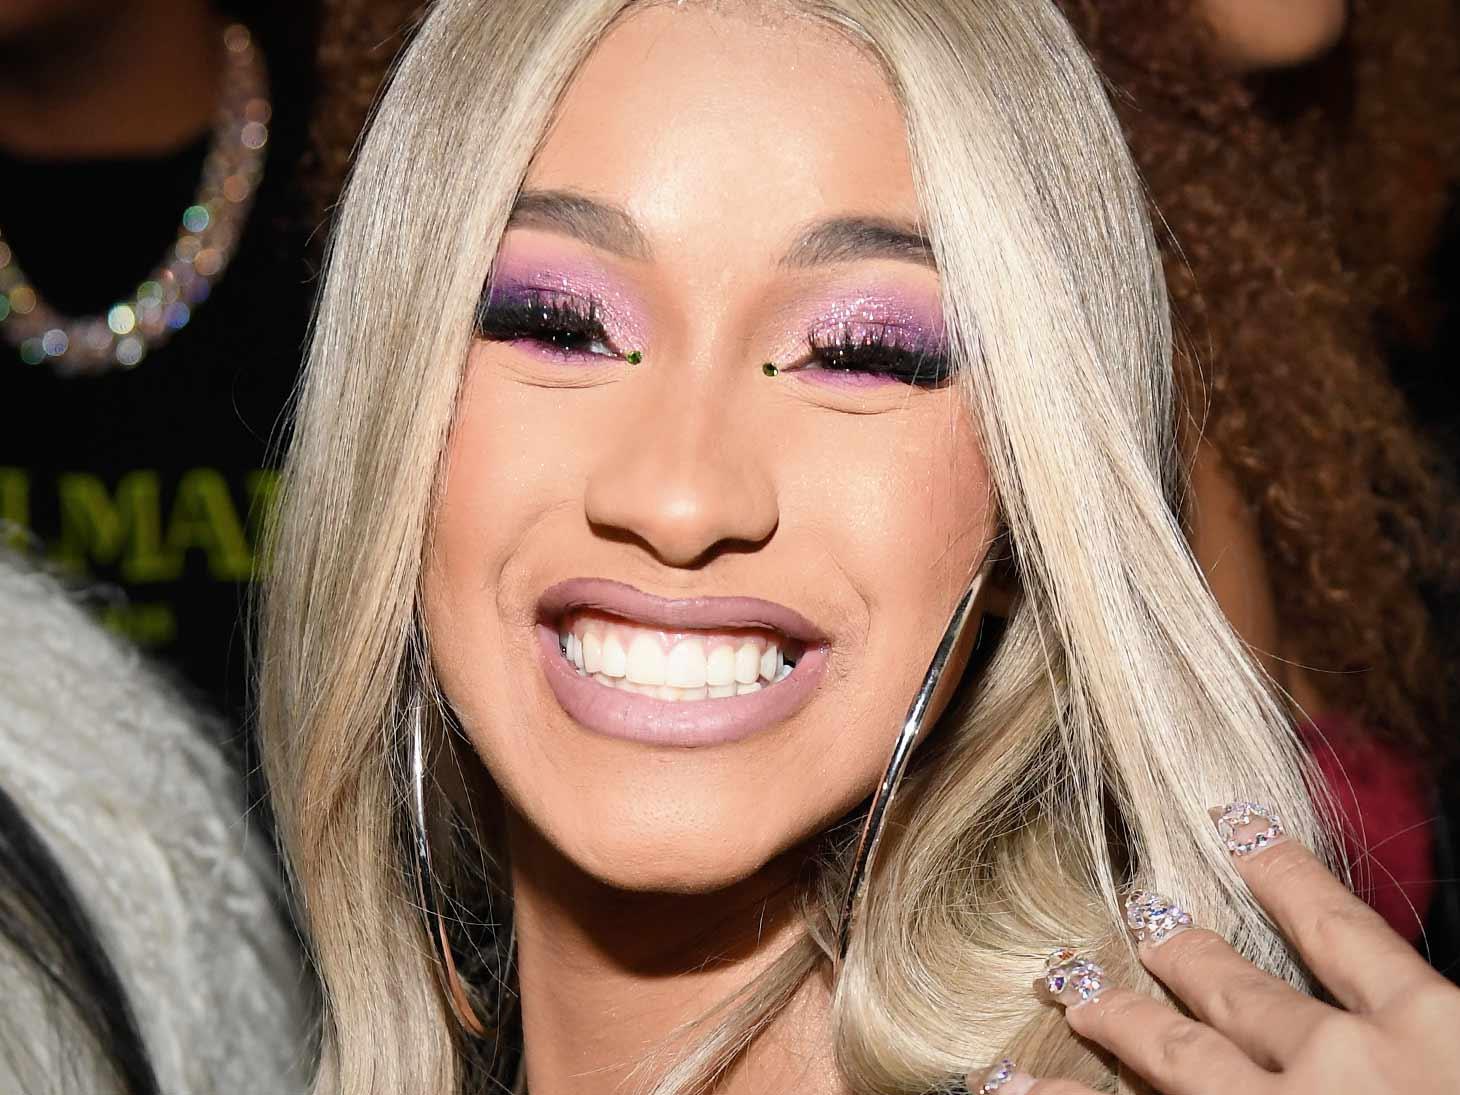 Cardi B Deactivates Her Instagram Page After Rough Day on Social Media